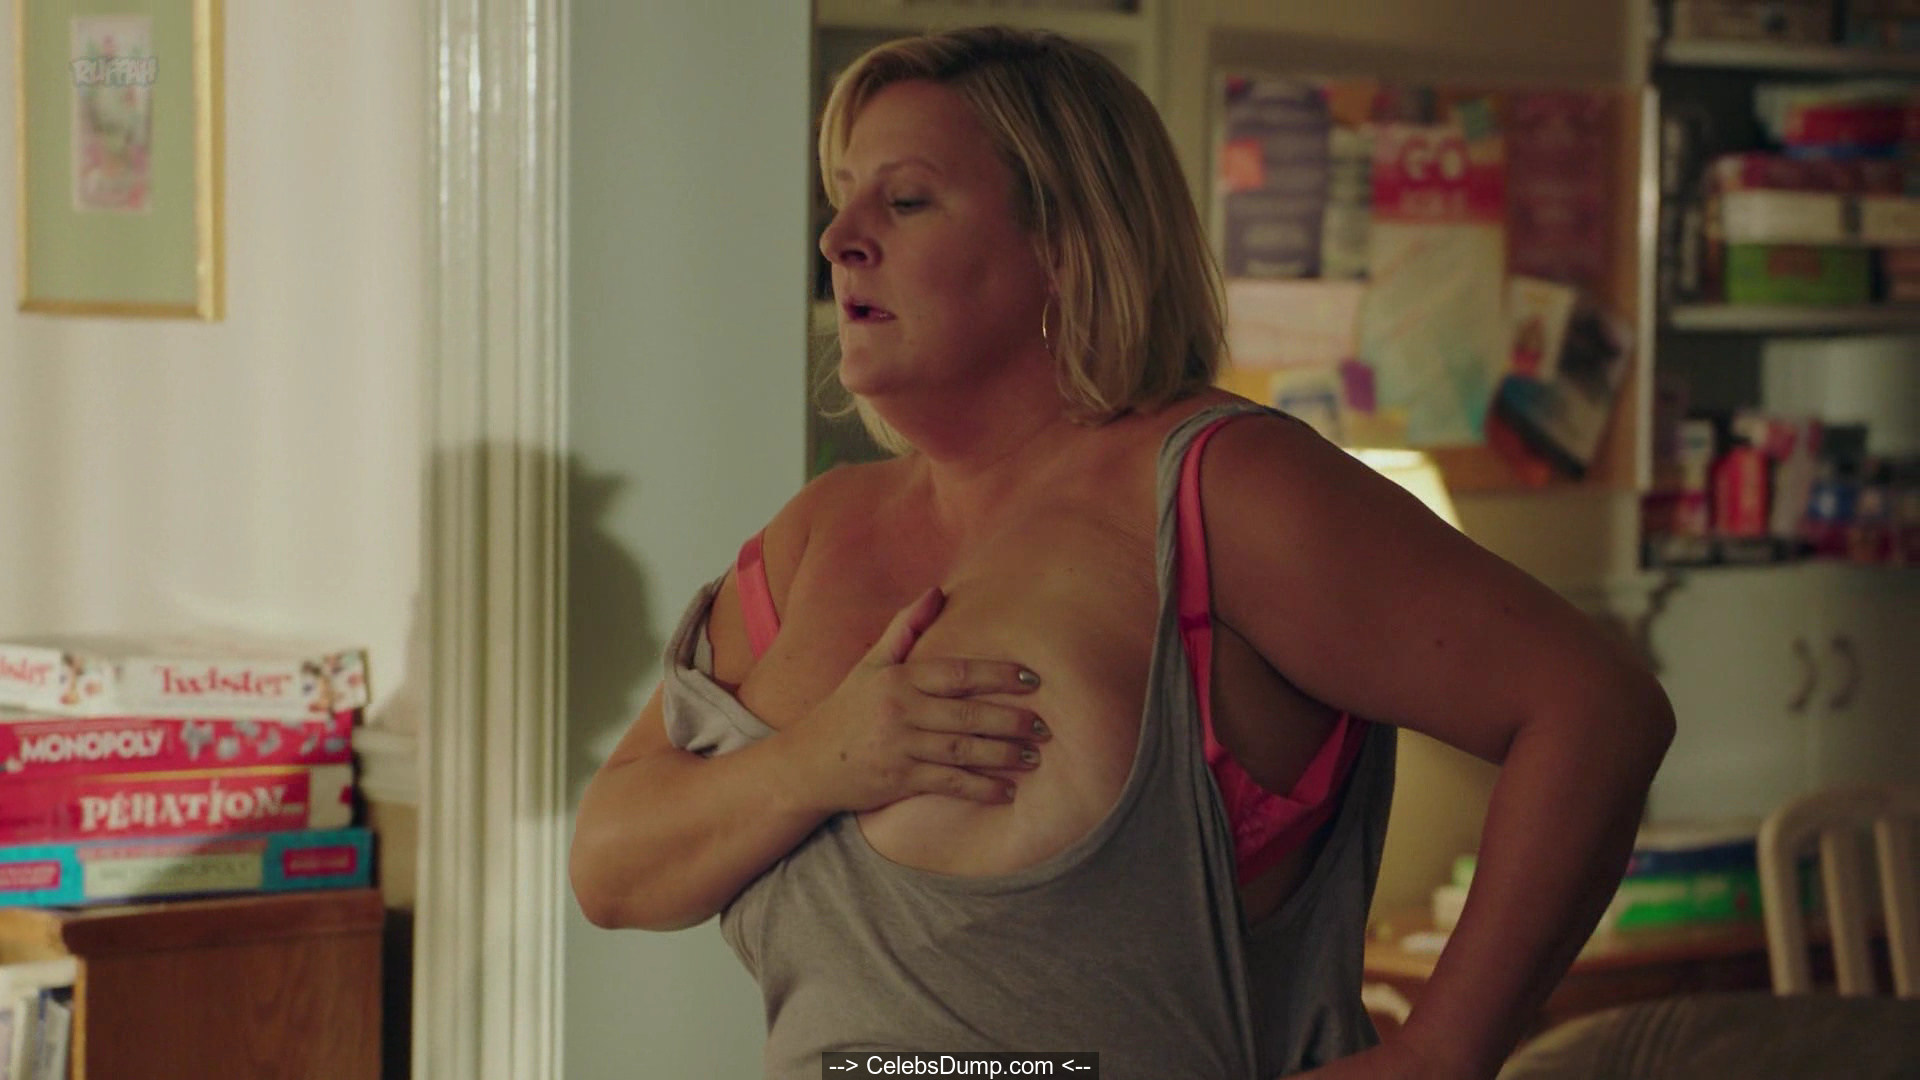 Bridget Everett nude boobs and ass in Love You More s01e01 (2017)